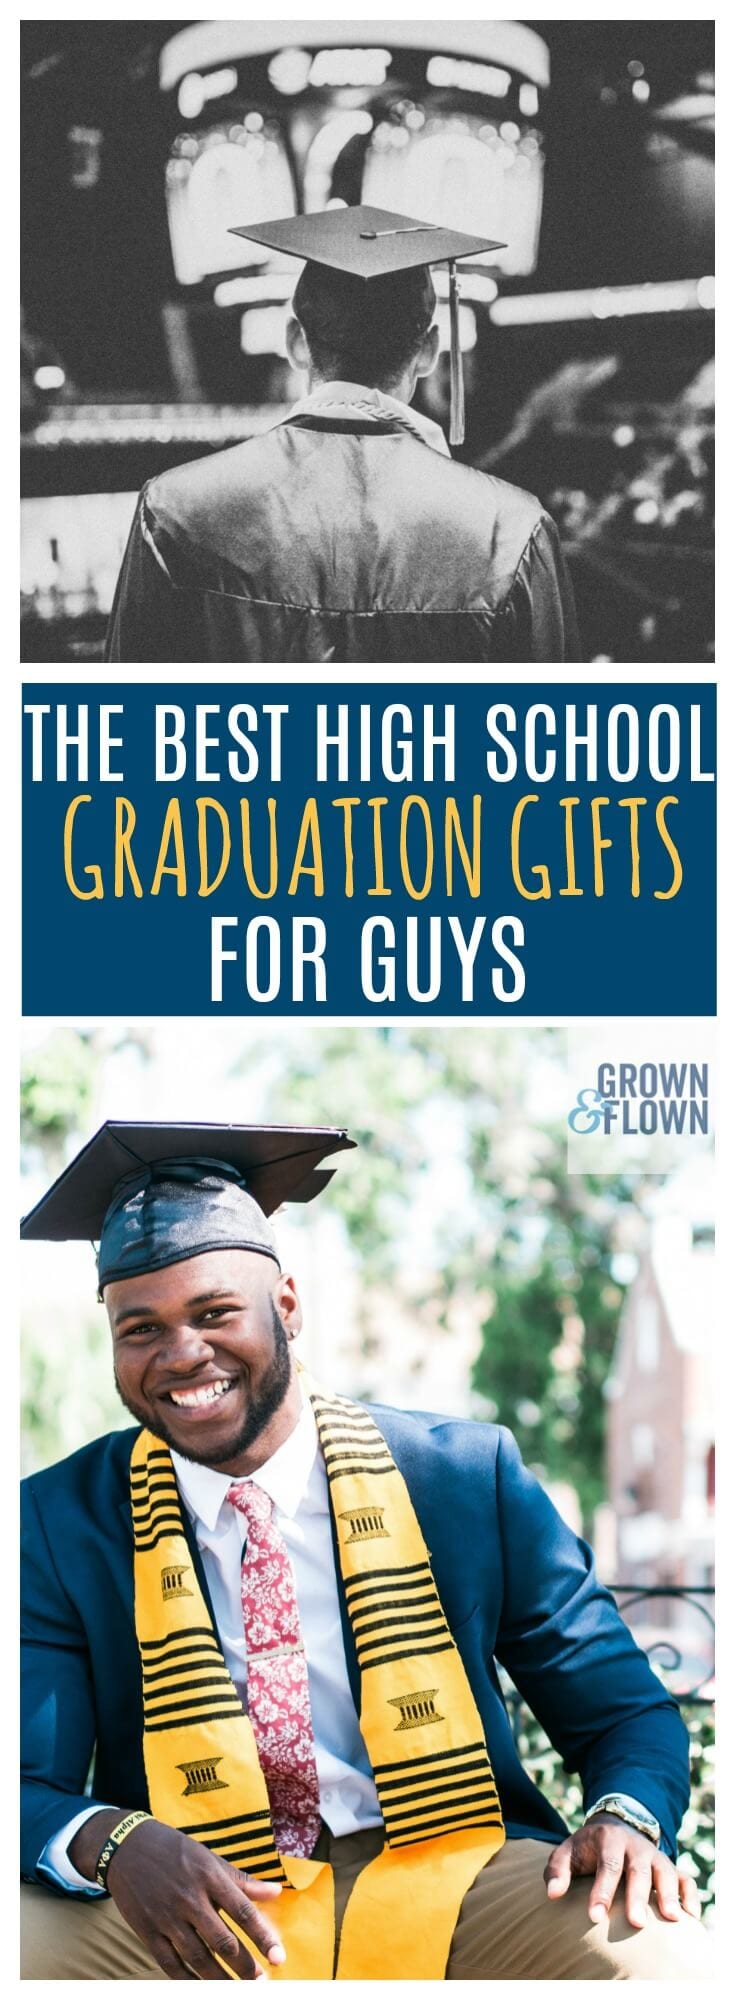 f you're looking for the BEST high school graduation gifts for guys, then this list has it all. If you're looking to make your graduate happy, and want the best grad gift ideas, you'll find it right here. #giftideas #highschoolgrad #graduation #graduationgifts #gradgifts #graduationgiftideas